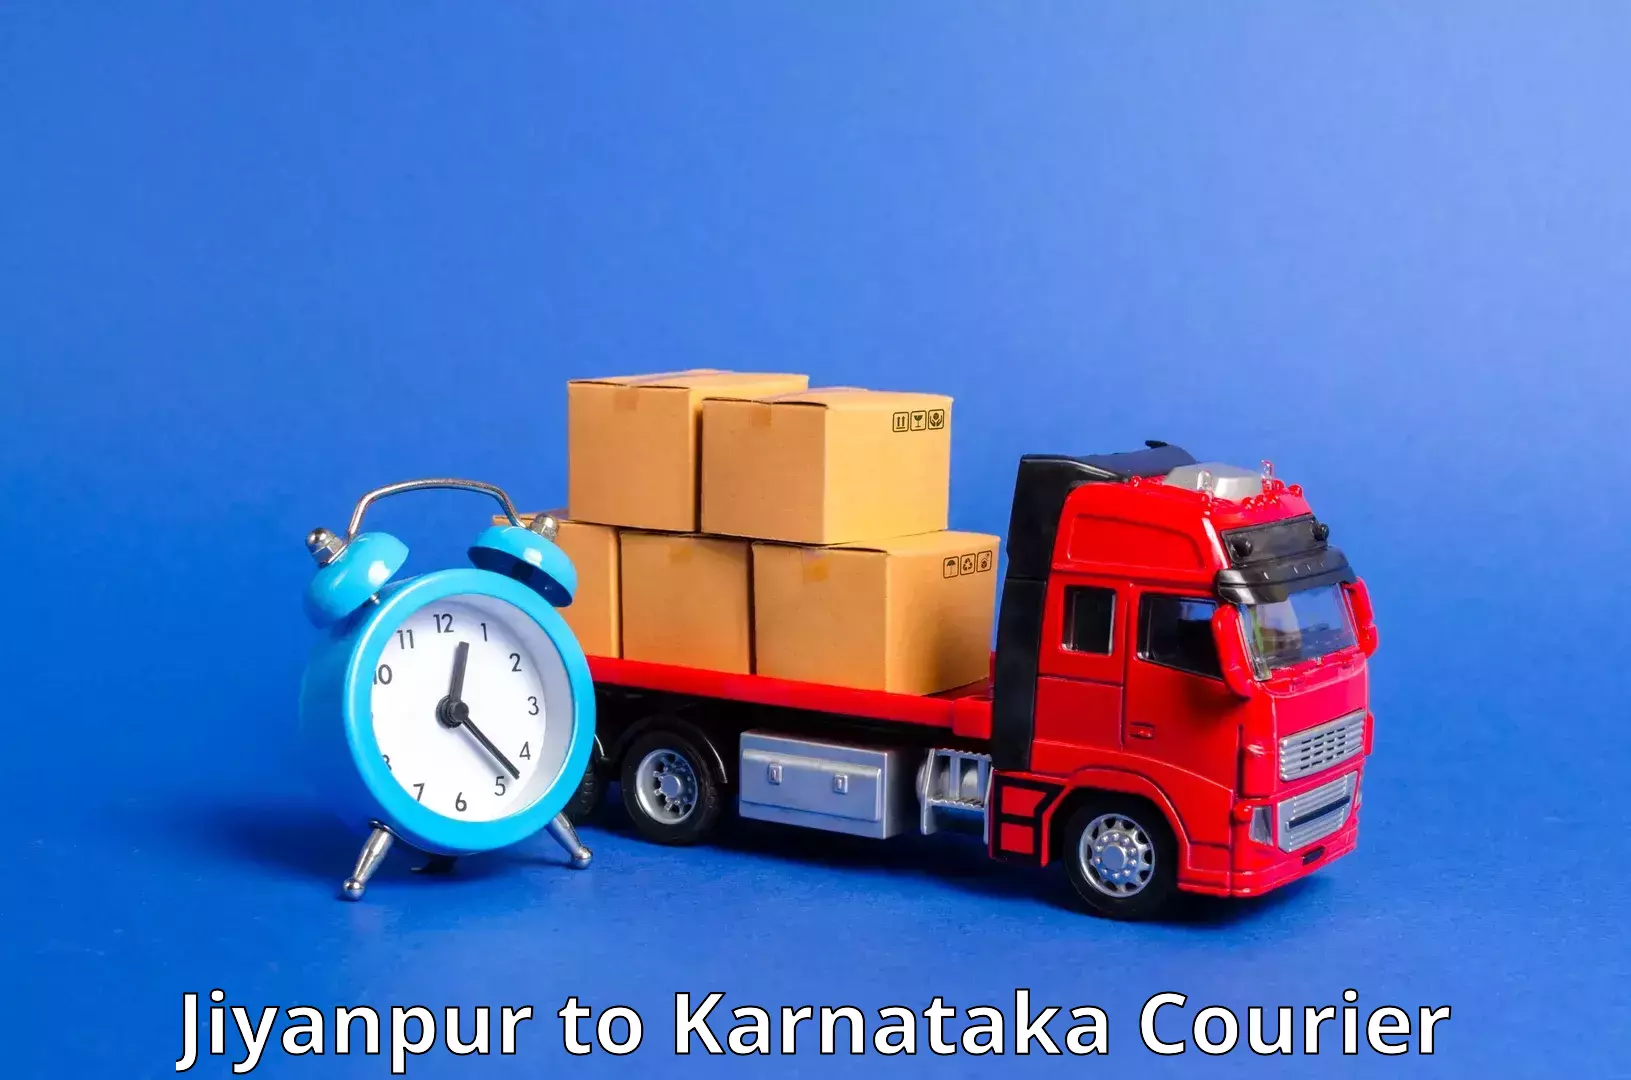 24-hour courier service Jiyanpur to KLE Academy of Higher Education and Research Belagavi